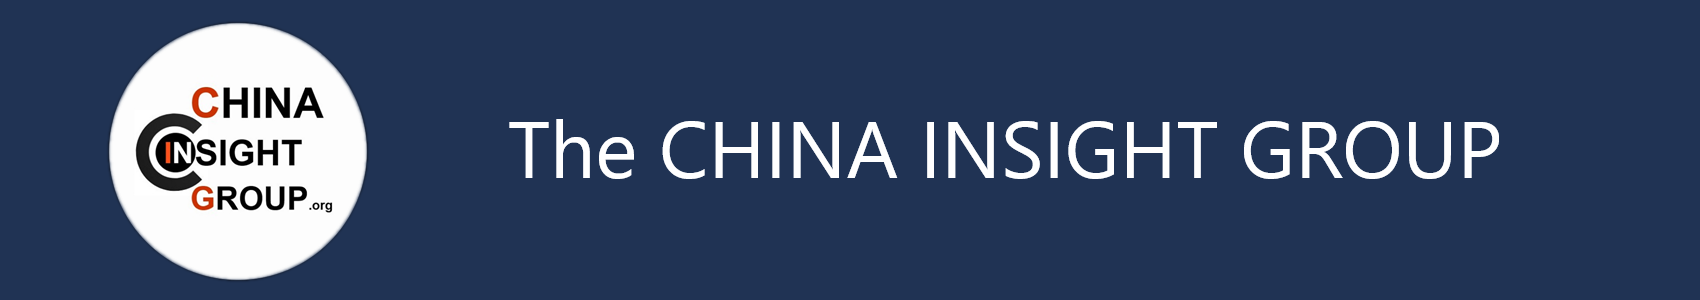 The China Insight Group